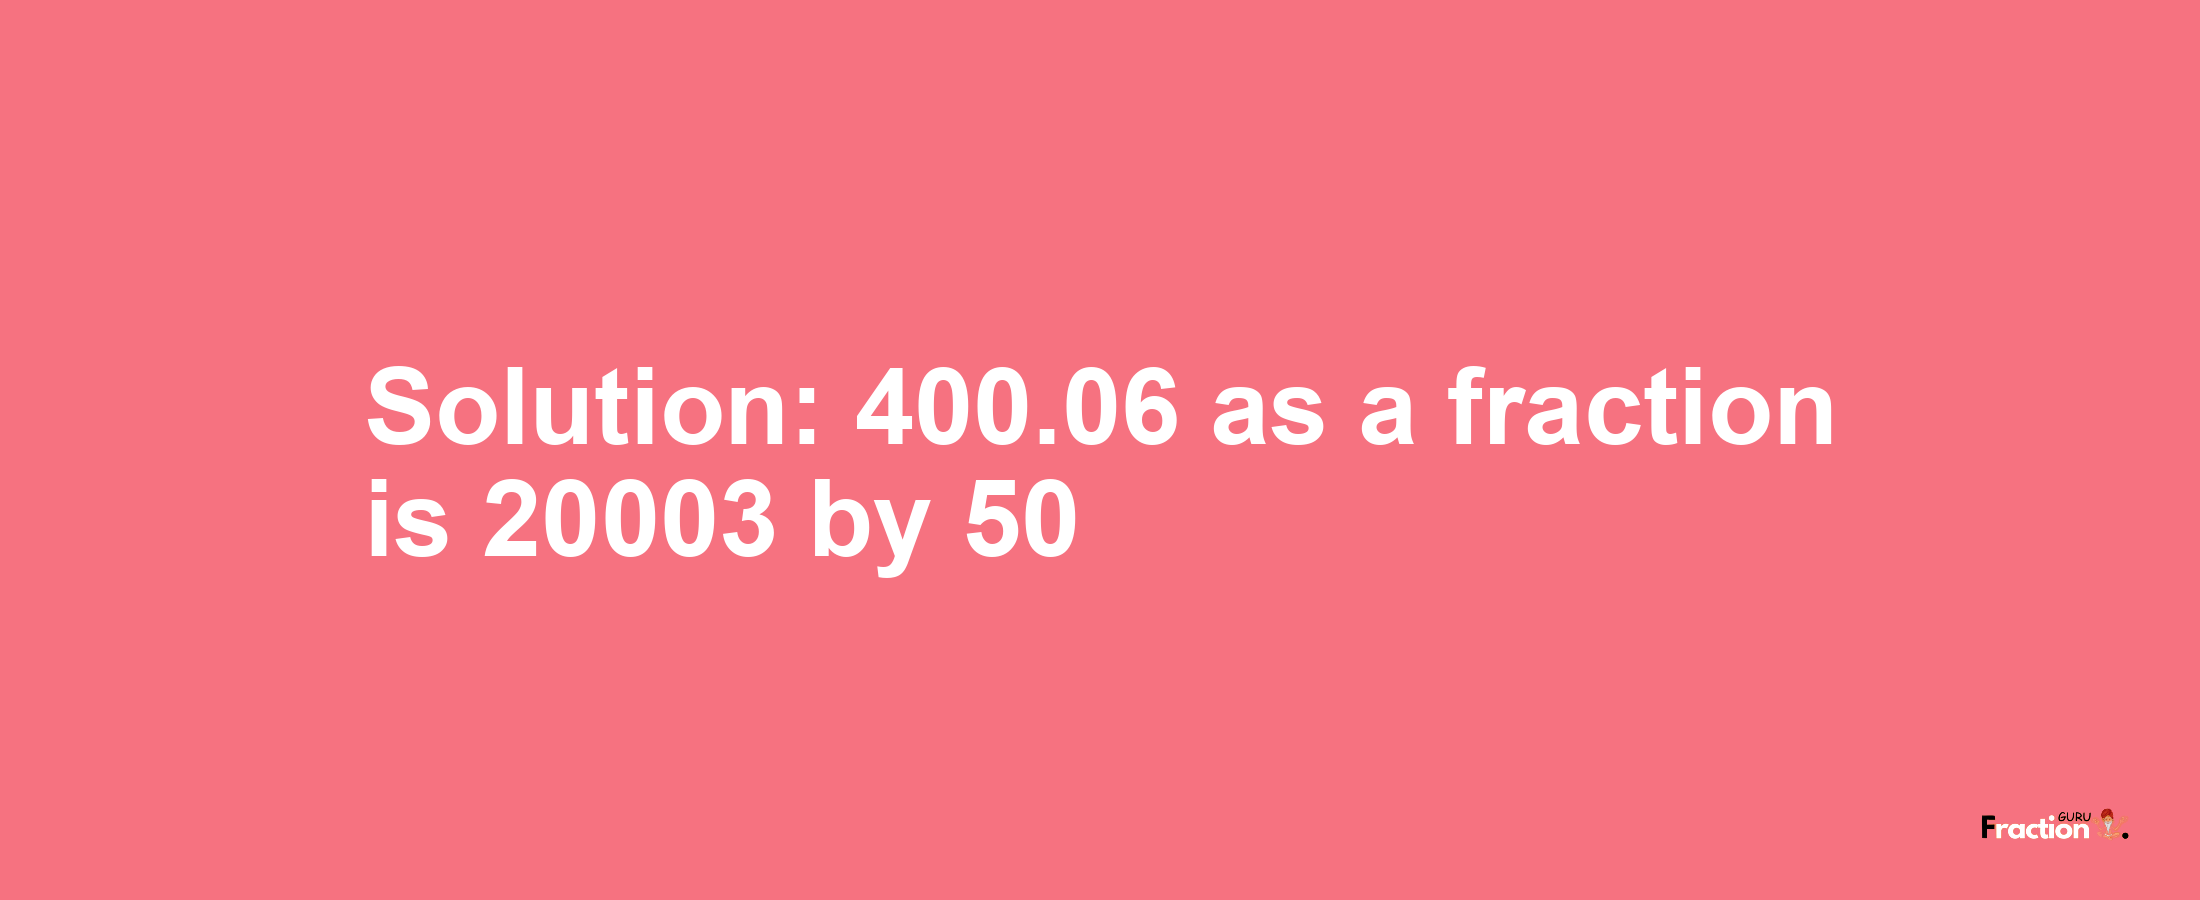 Solution:400.06 as a fraction is 20003/50